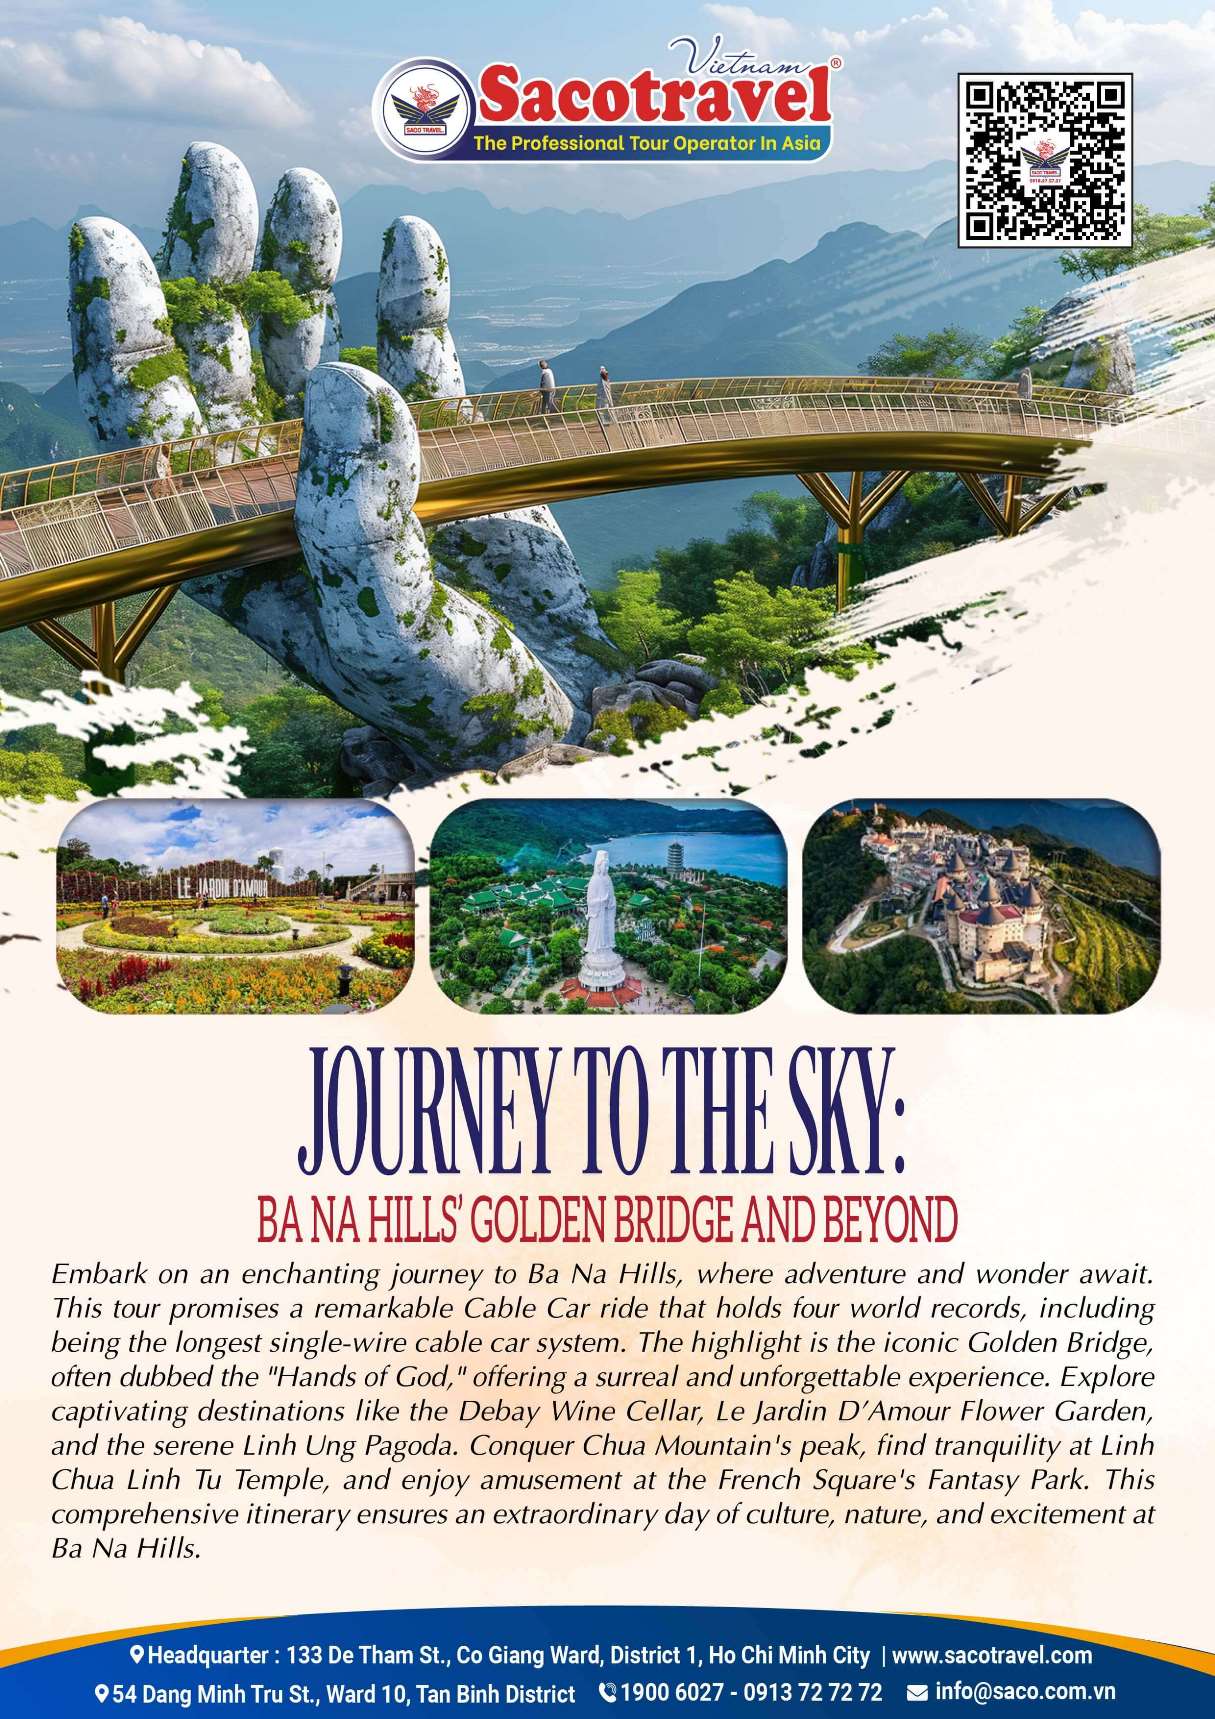 JOURNEY TO THE SKY BA NA HILLS GOLDEN BRIDGE AND BEYOND